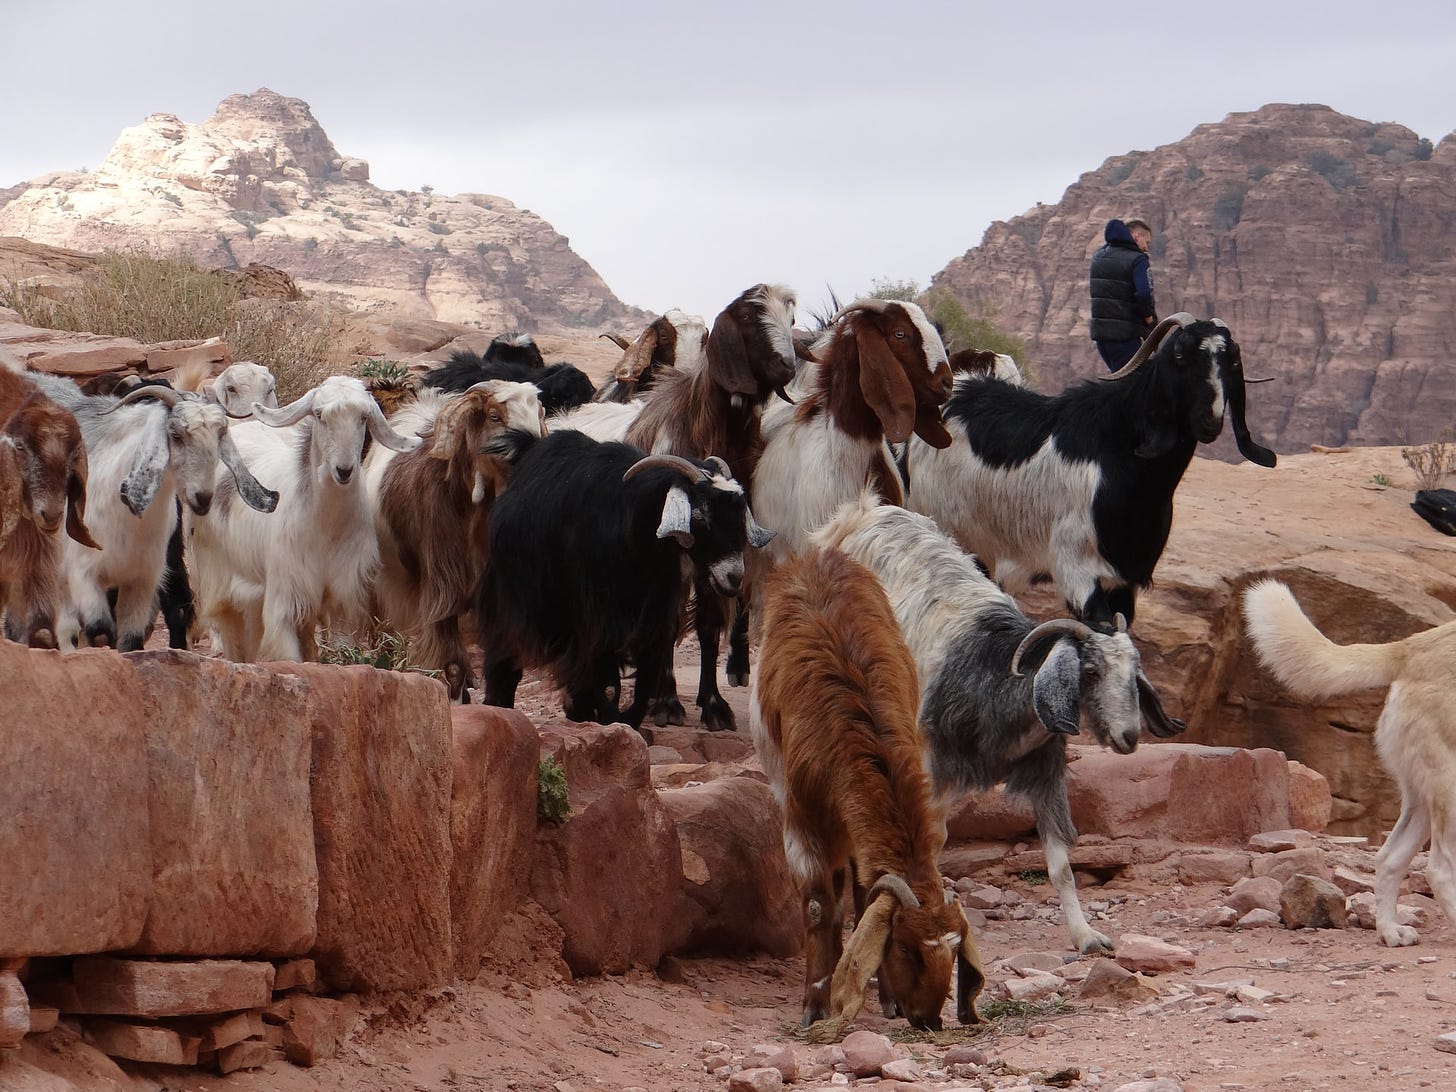 A group of goats on a rock outcrop in a desert, along with a human.